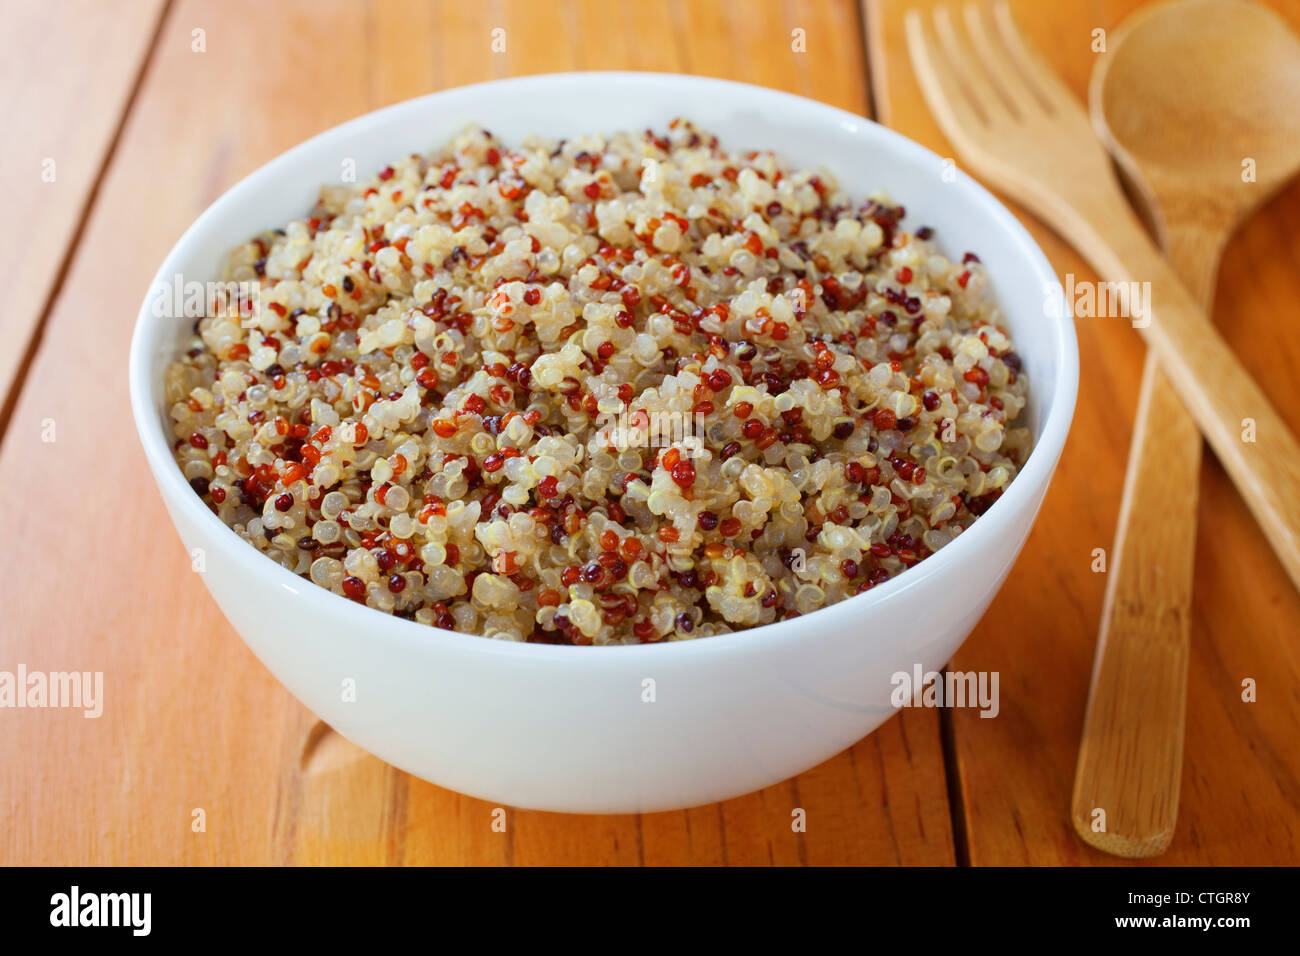 A bowl of cooked quinoa and amaranth. Contains red, white and black quinoa. Stock Photo